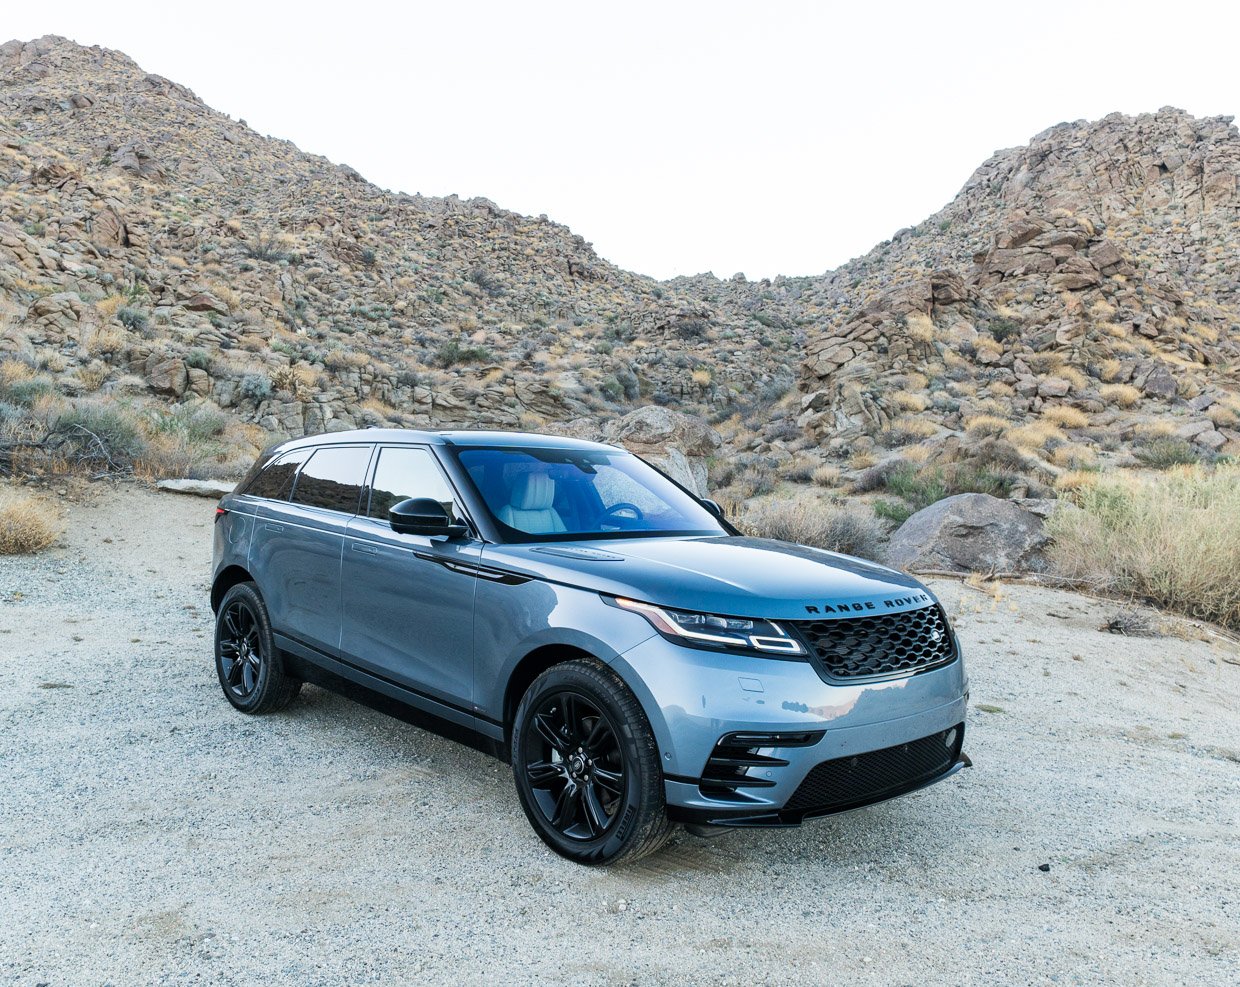 2018 Range Rover Velar First Drive: Sophistication Meets Capability